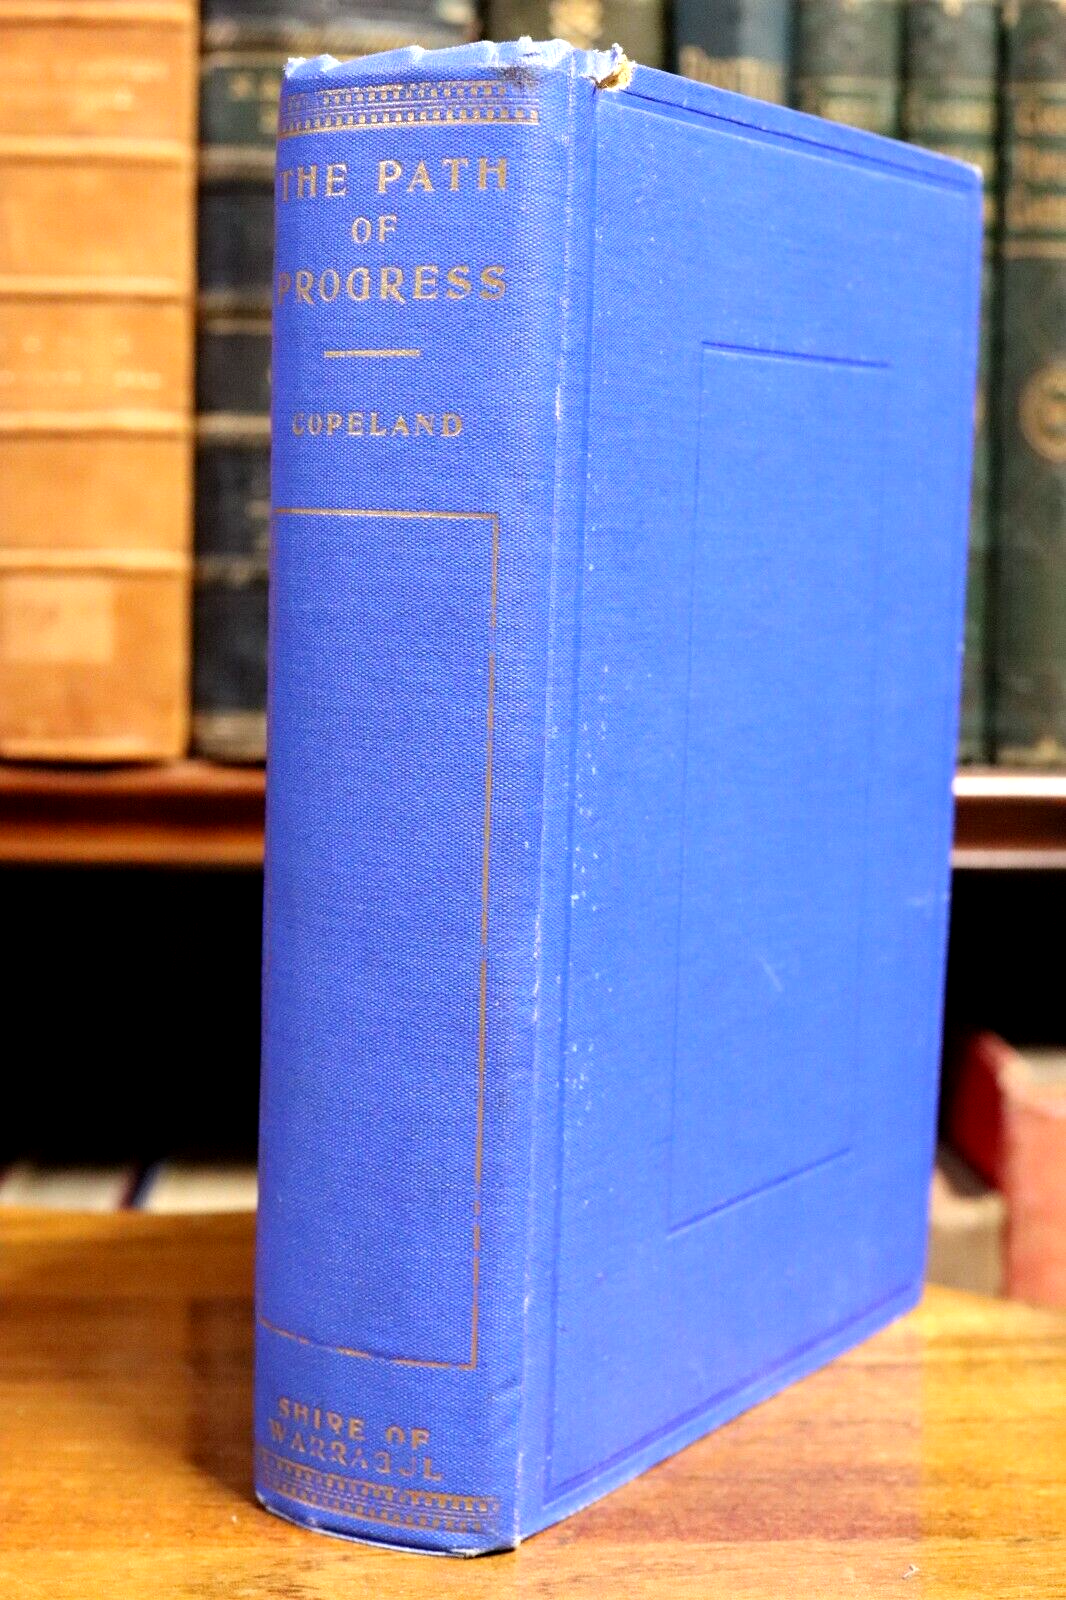 The Path Of Progress: H Copeland - 1934  Warragul History Book Author Inscribed